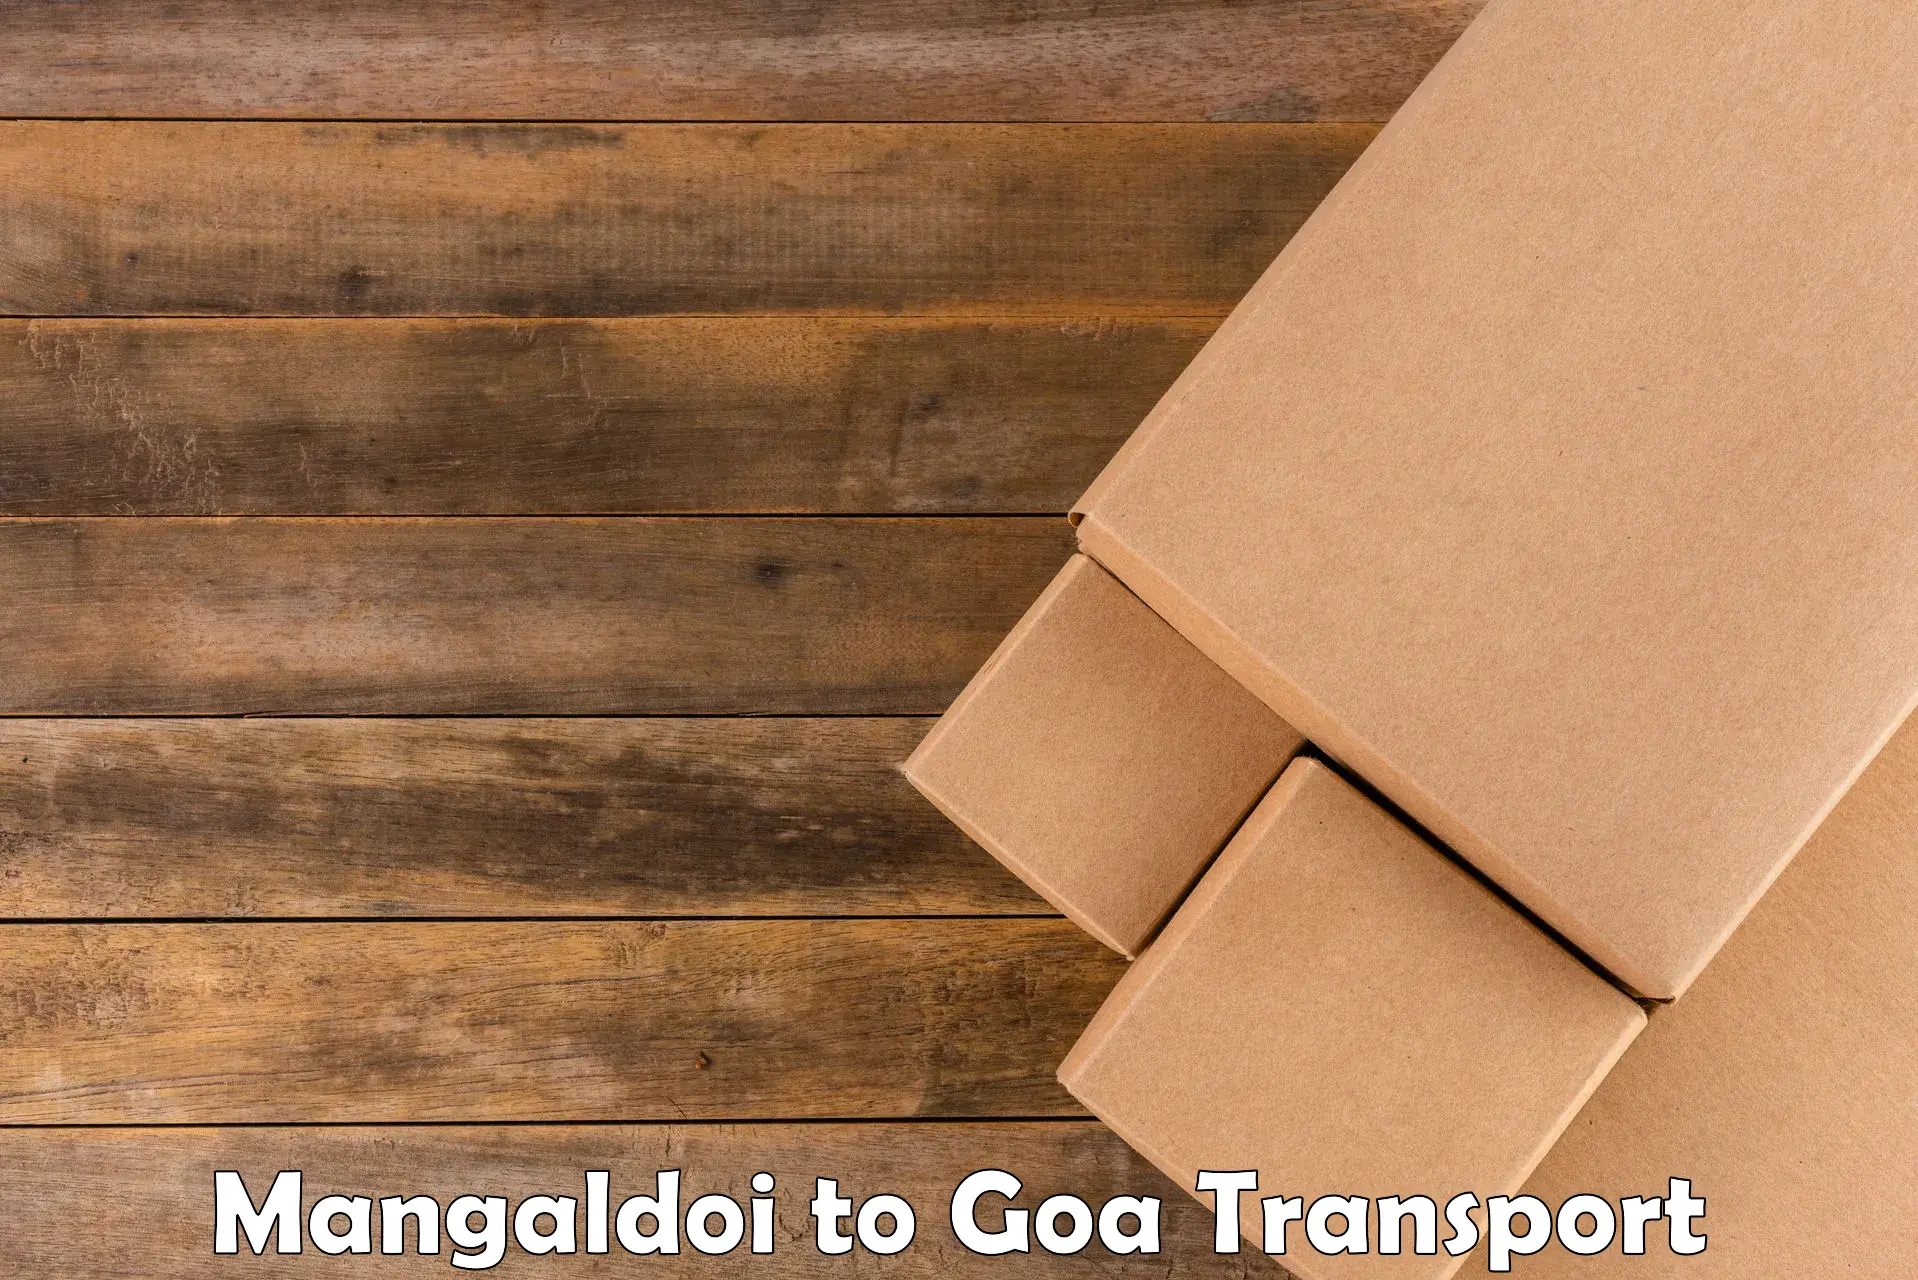 Transport bike from one state to another Mangaldoi to Mormugao Port